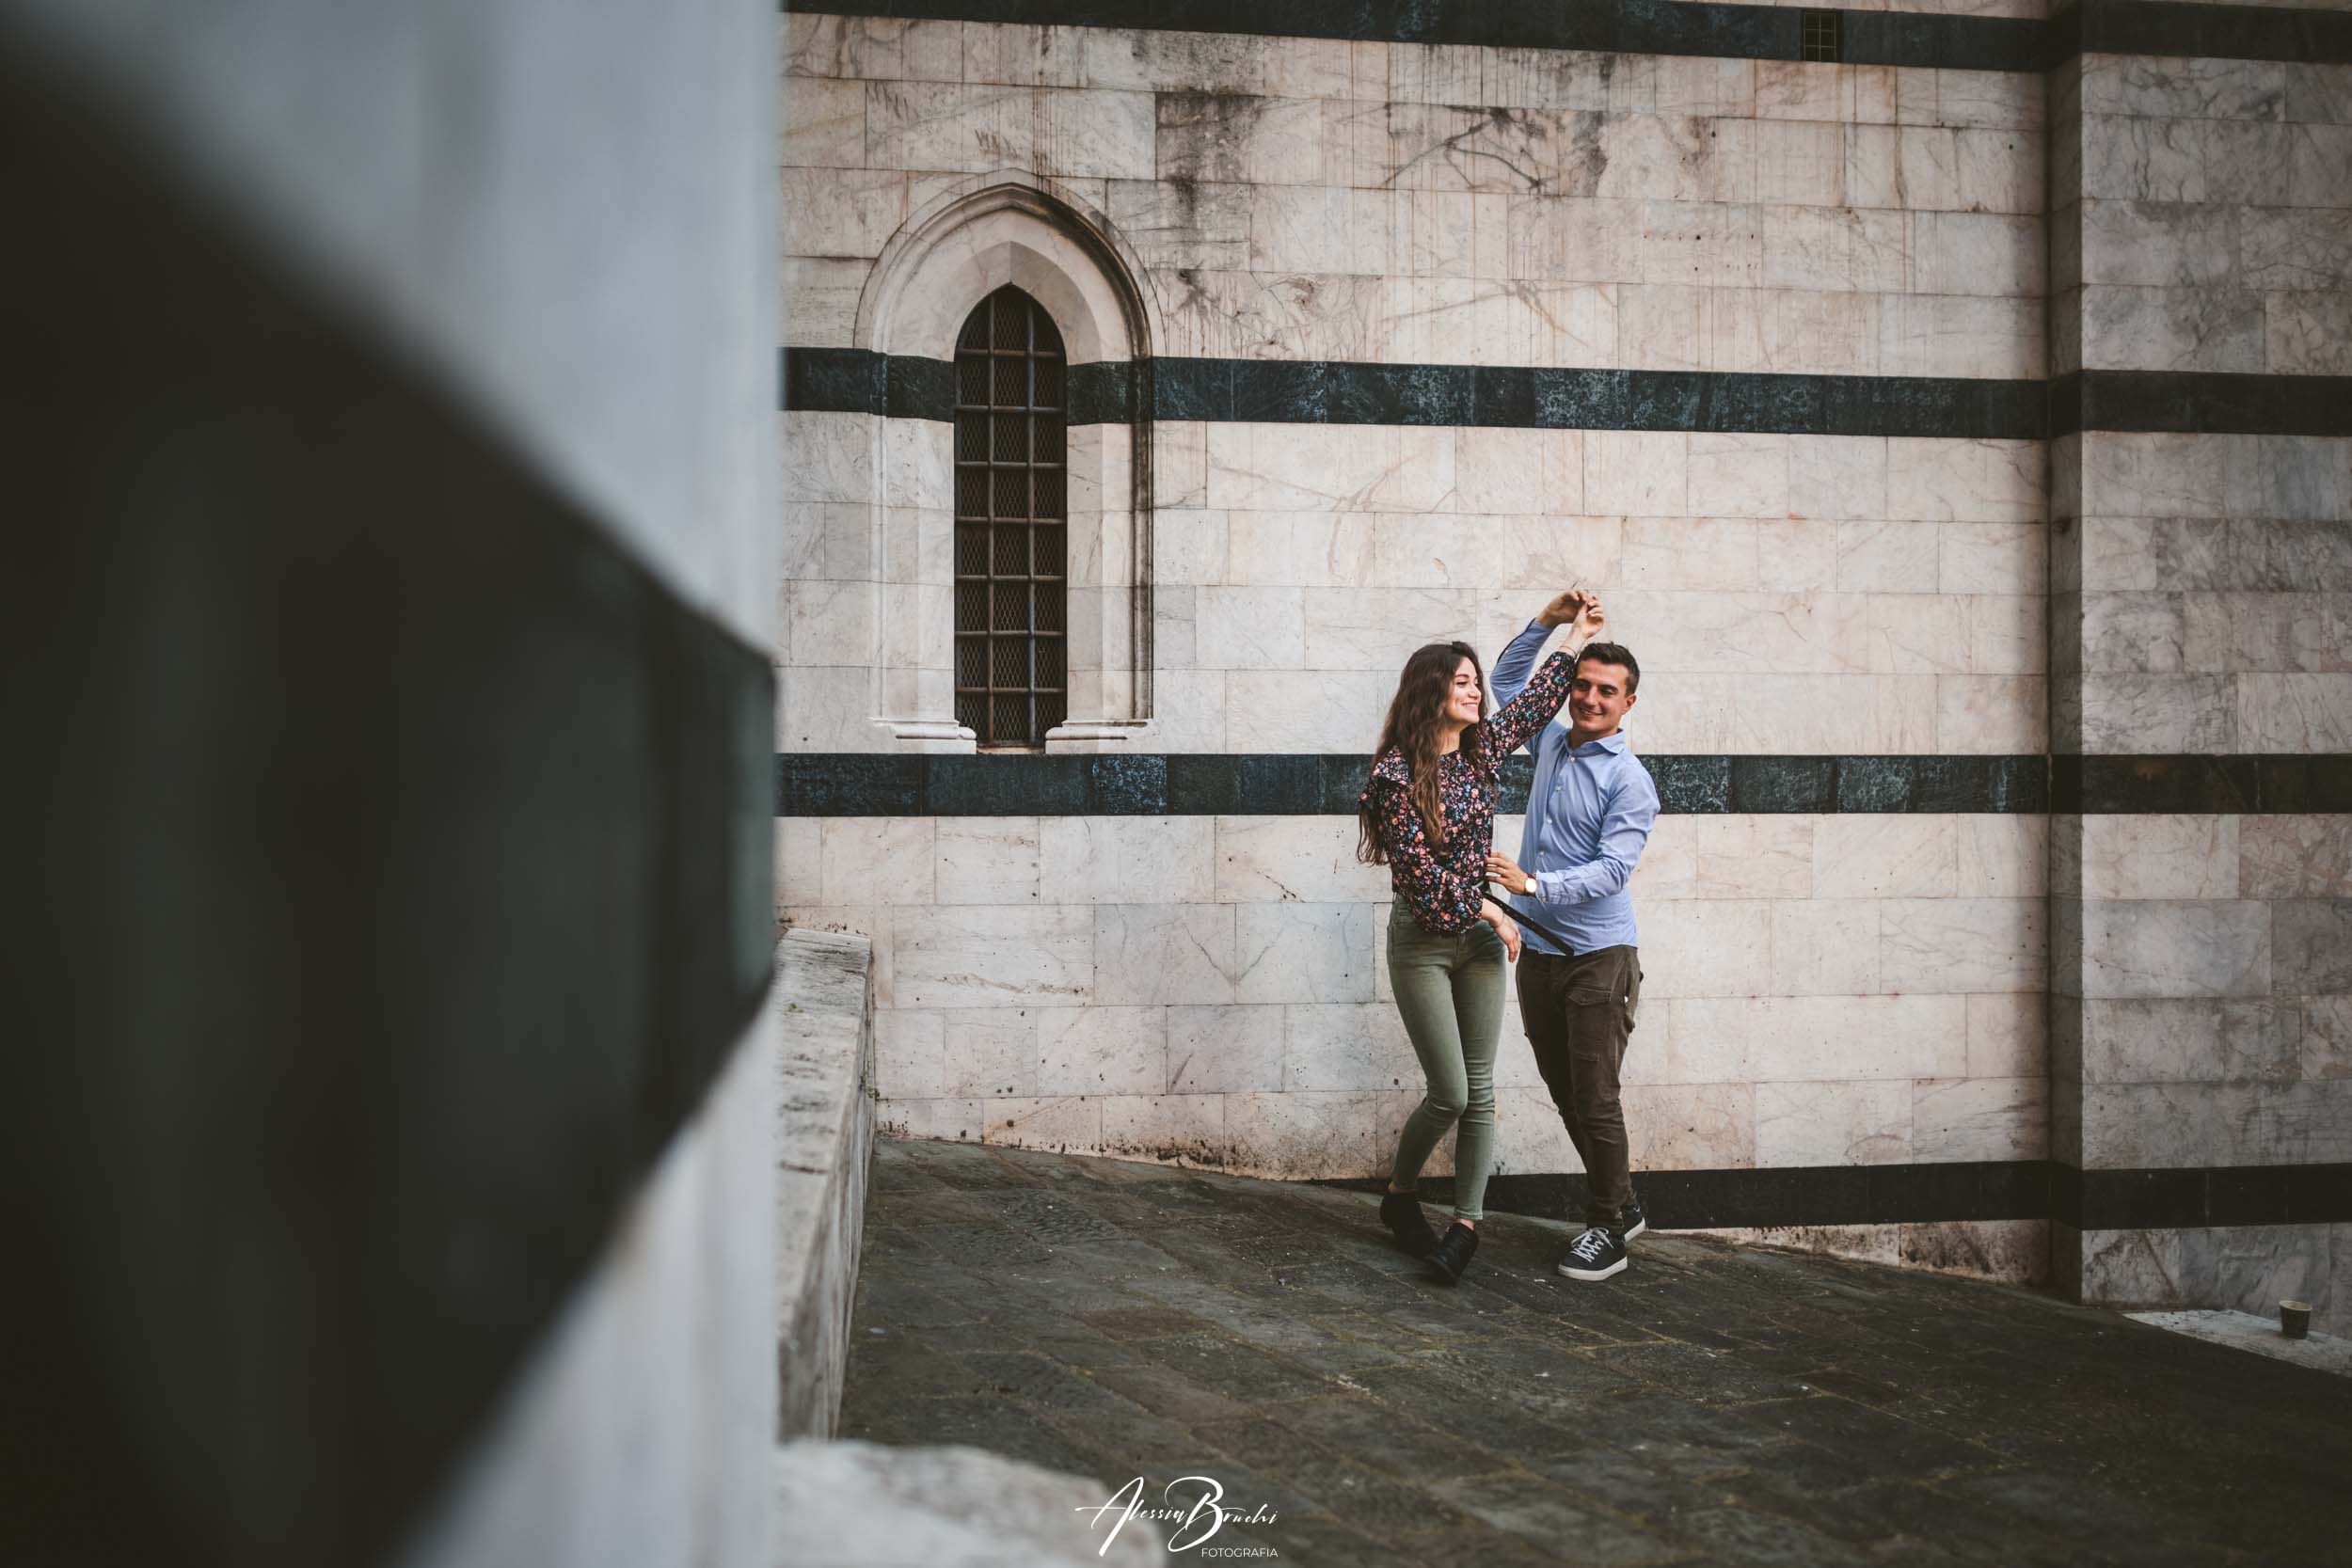 Engagement photos in Siena, Tuscany.